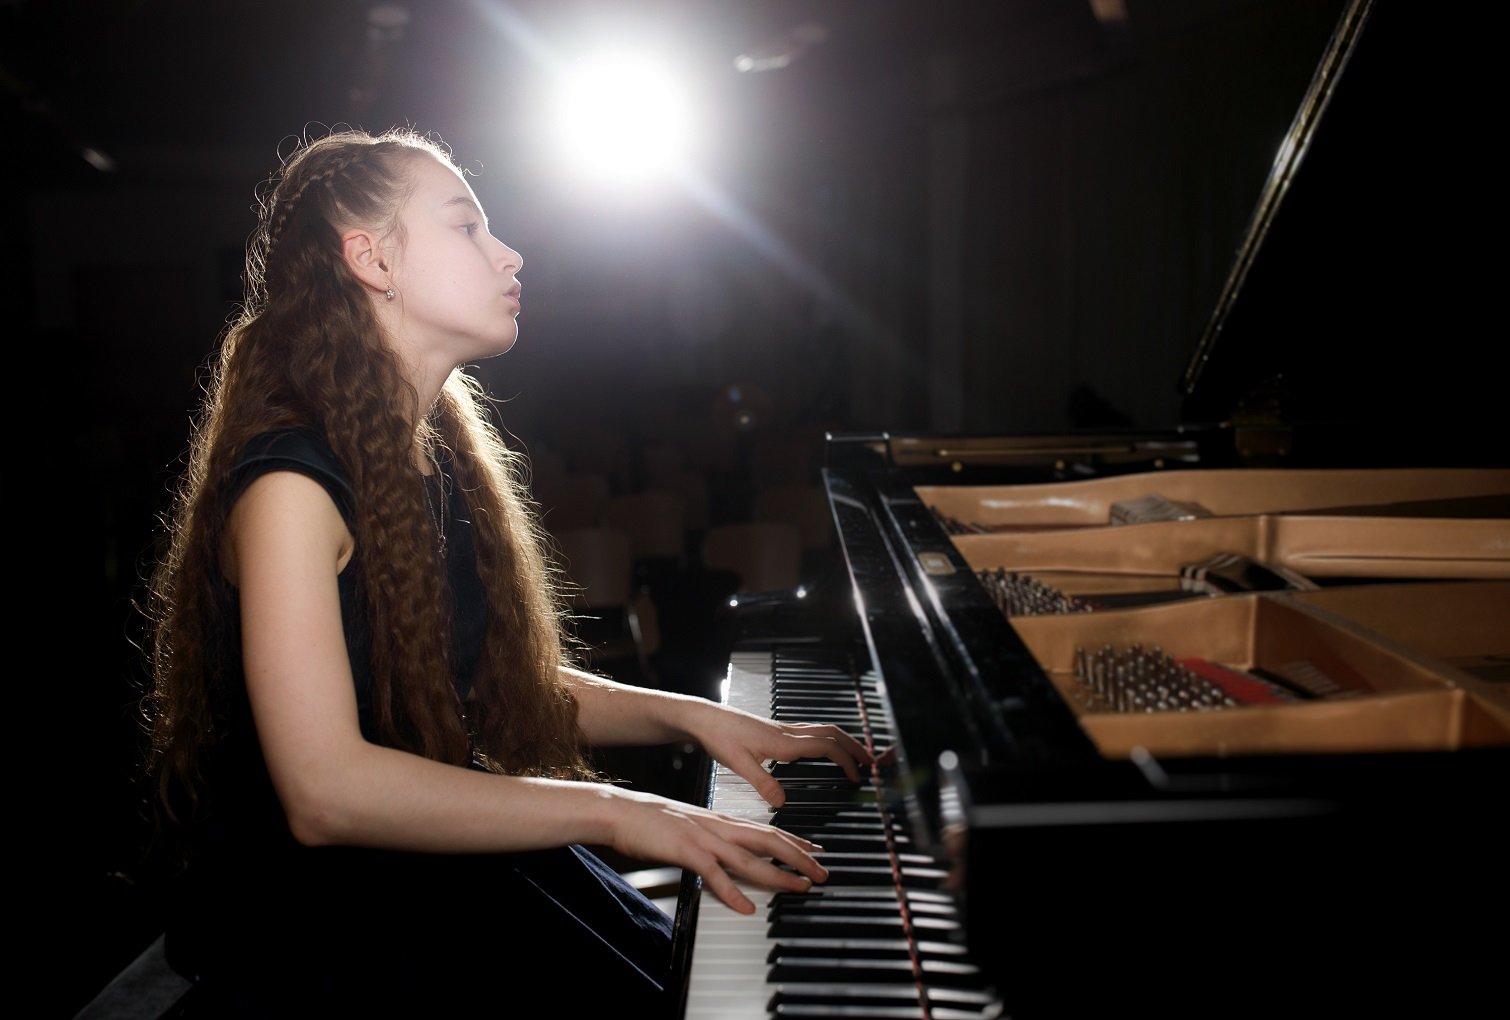 PETROF Art Family welcomed pianist Nora Lubbadová